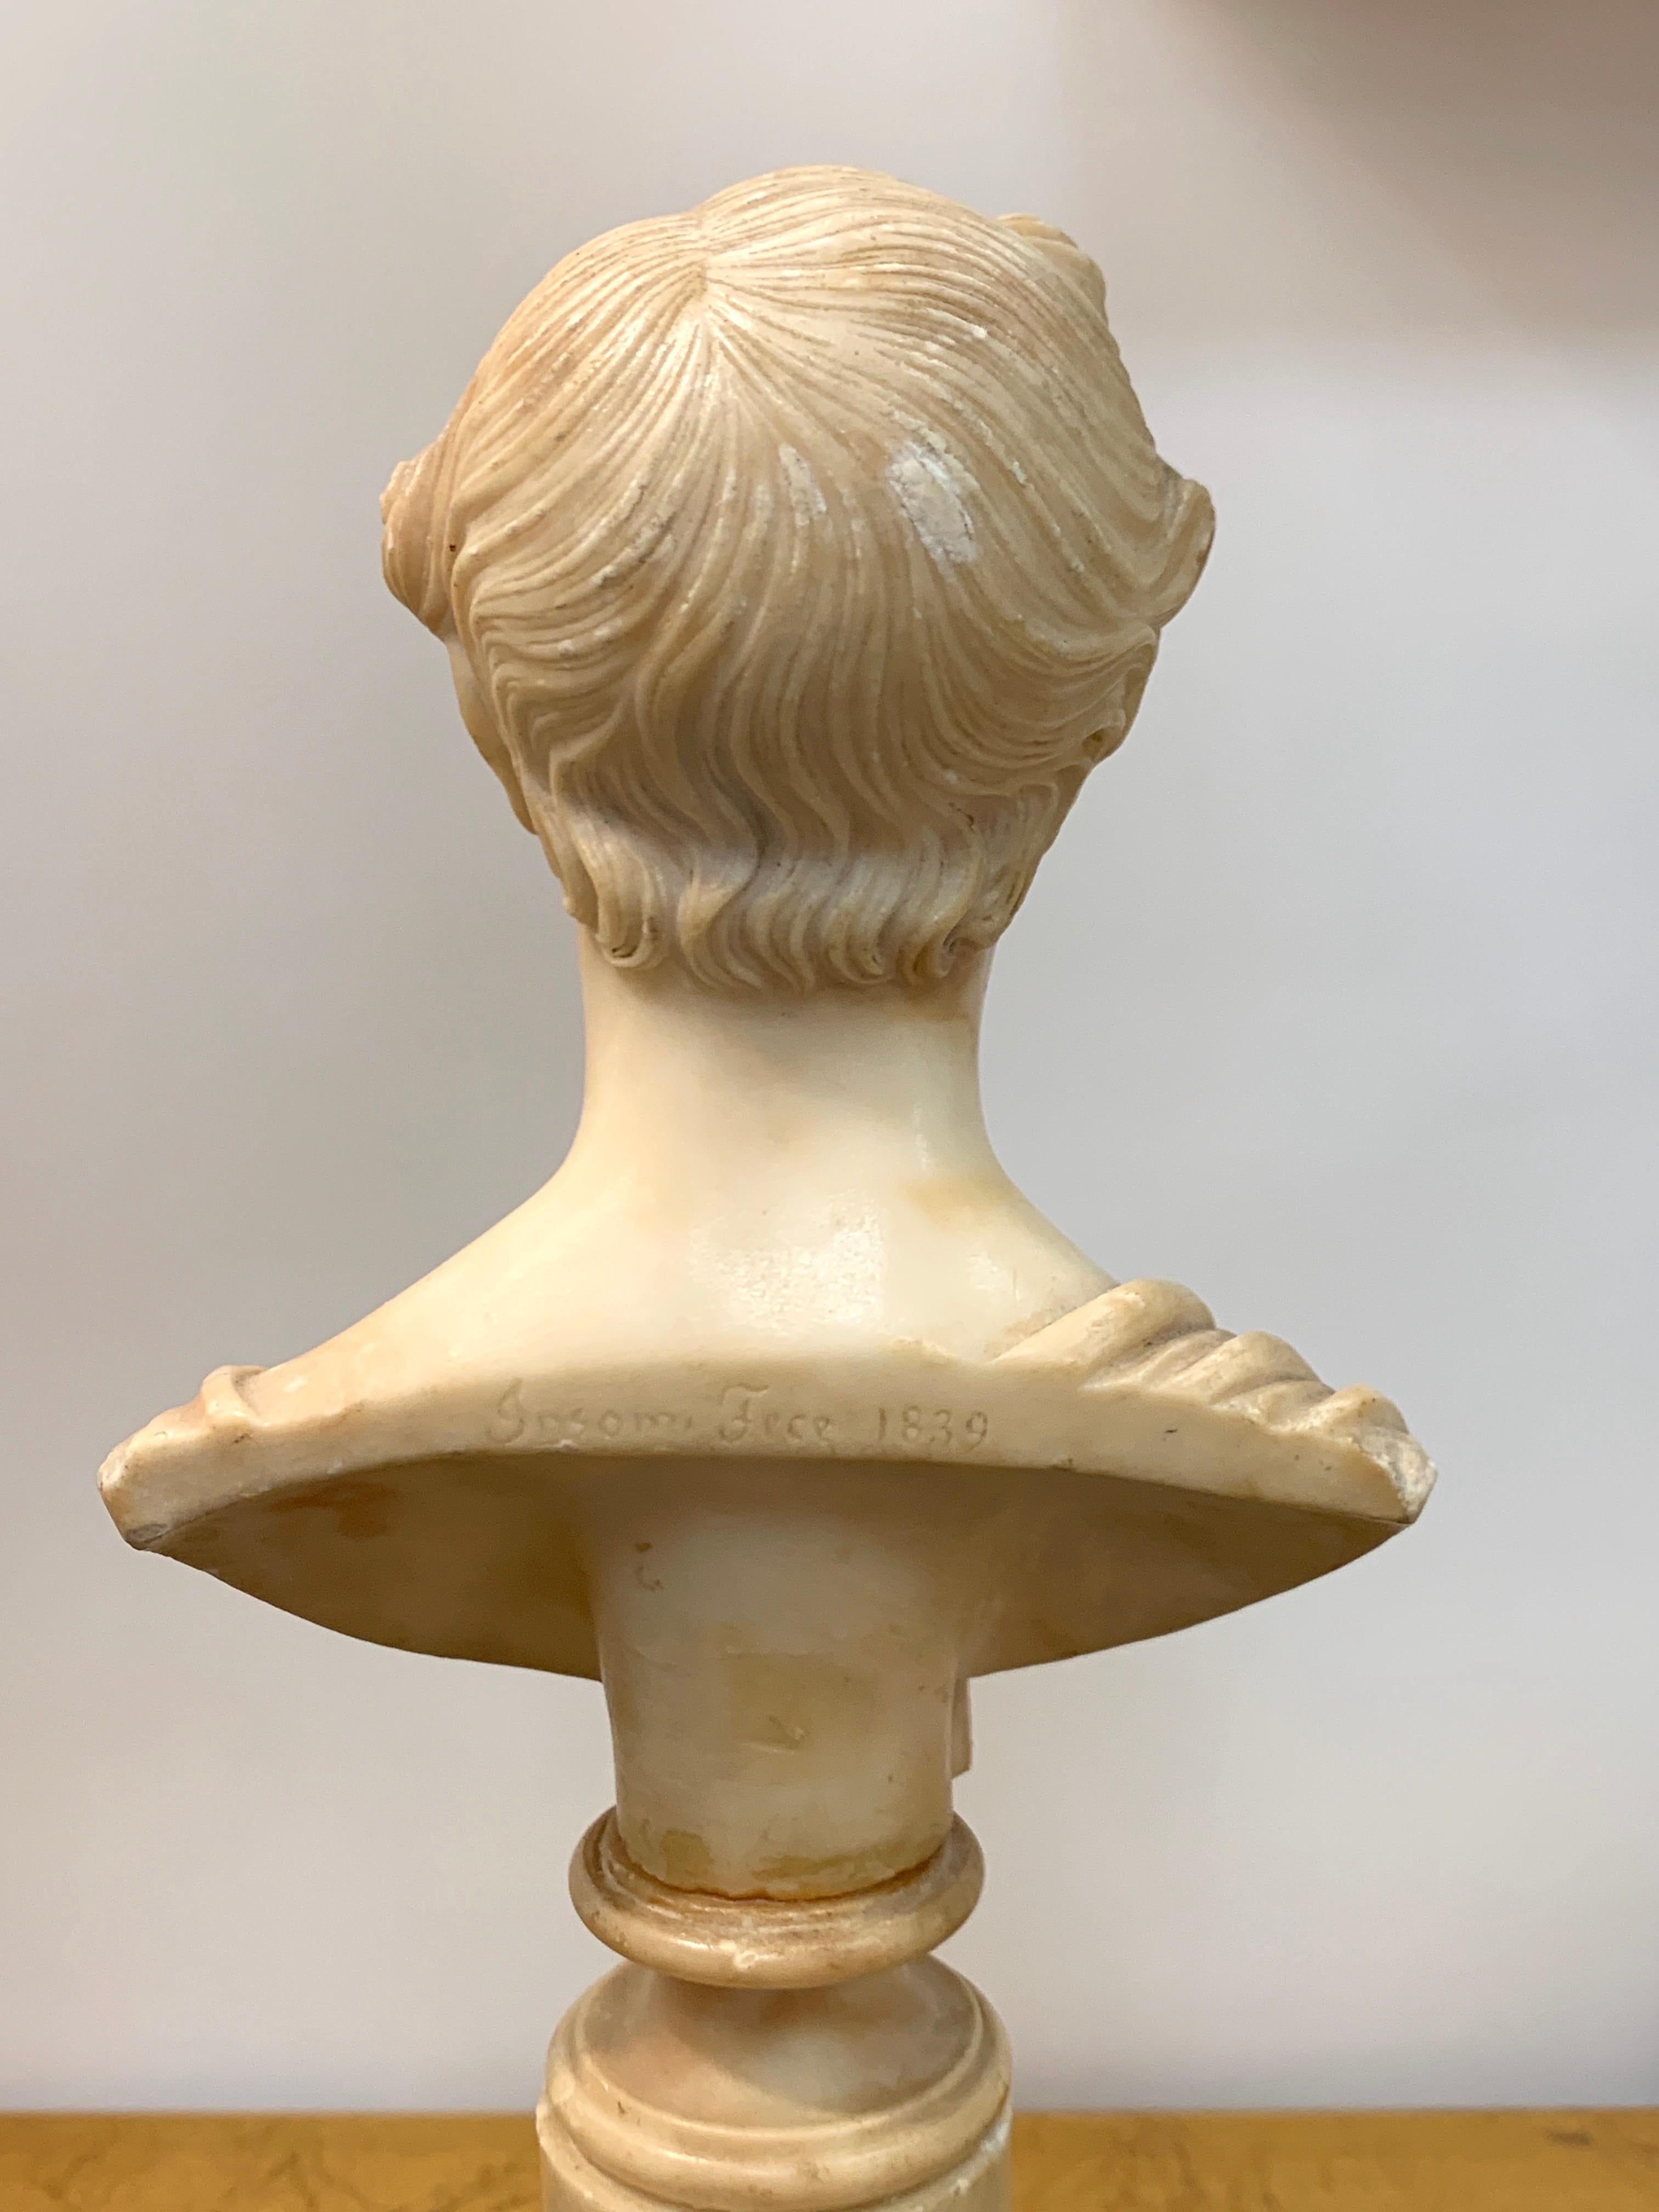 Italian Neoclassical Alabaster Portrait Bust of a Gentleman, by Insom Fece, 1839 For Sale 1